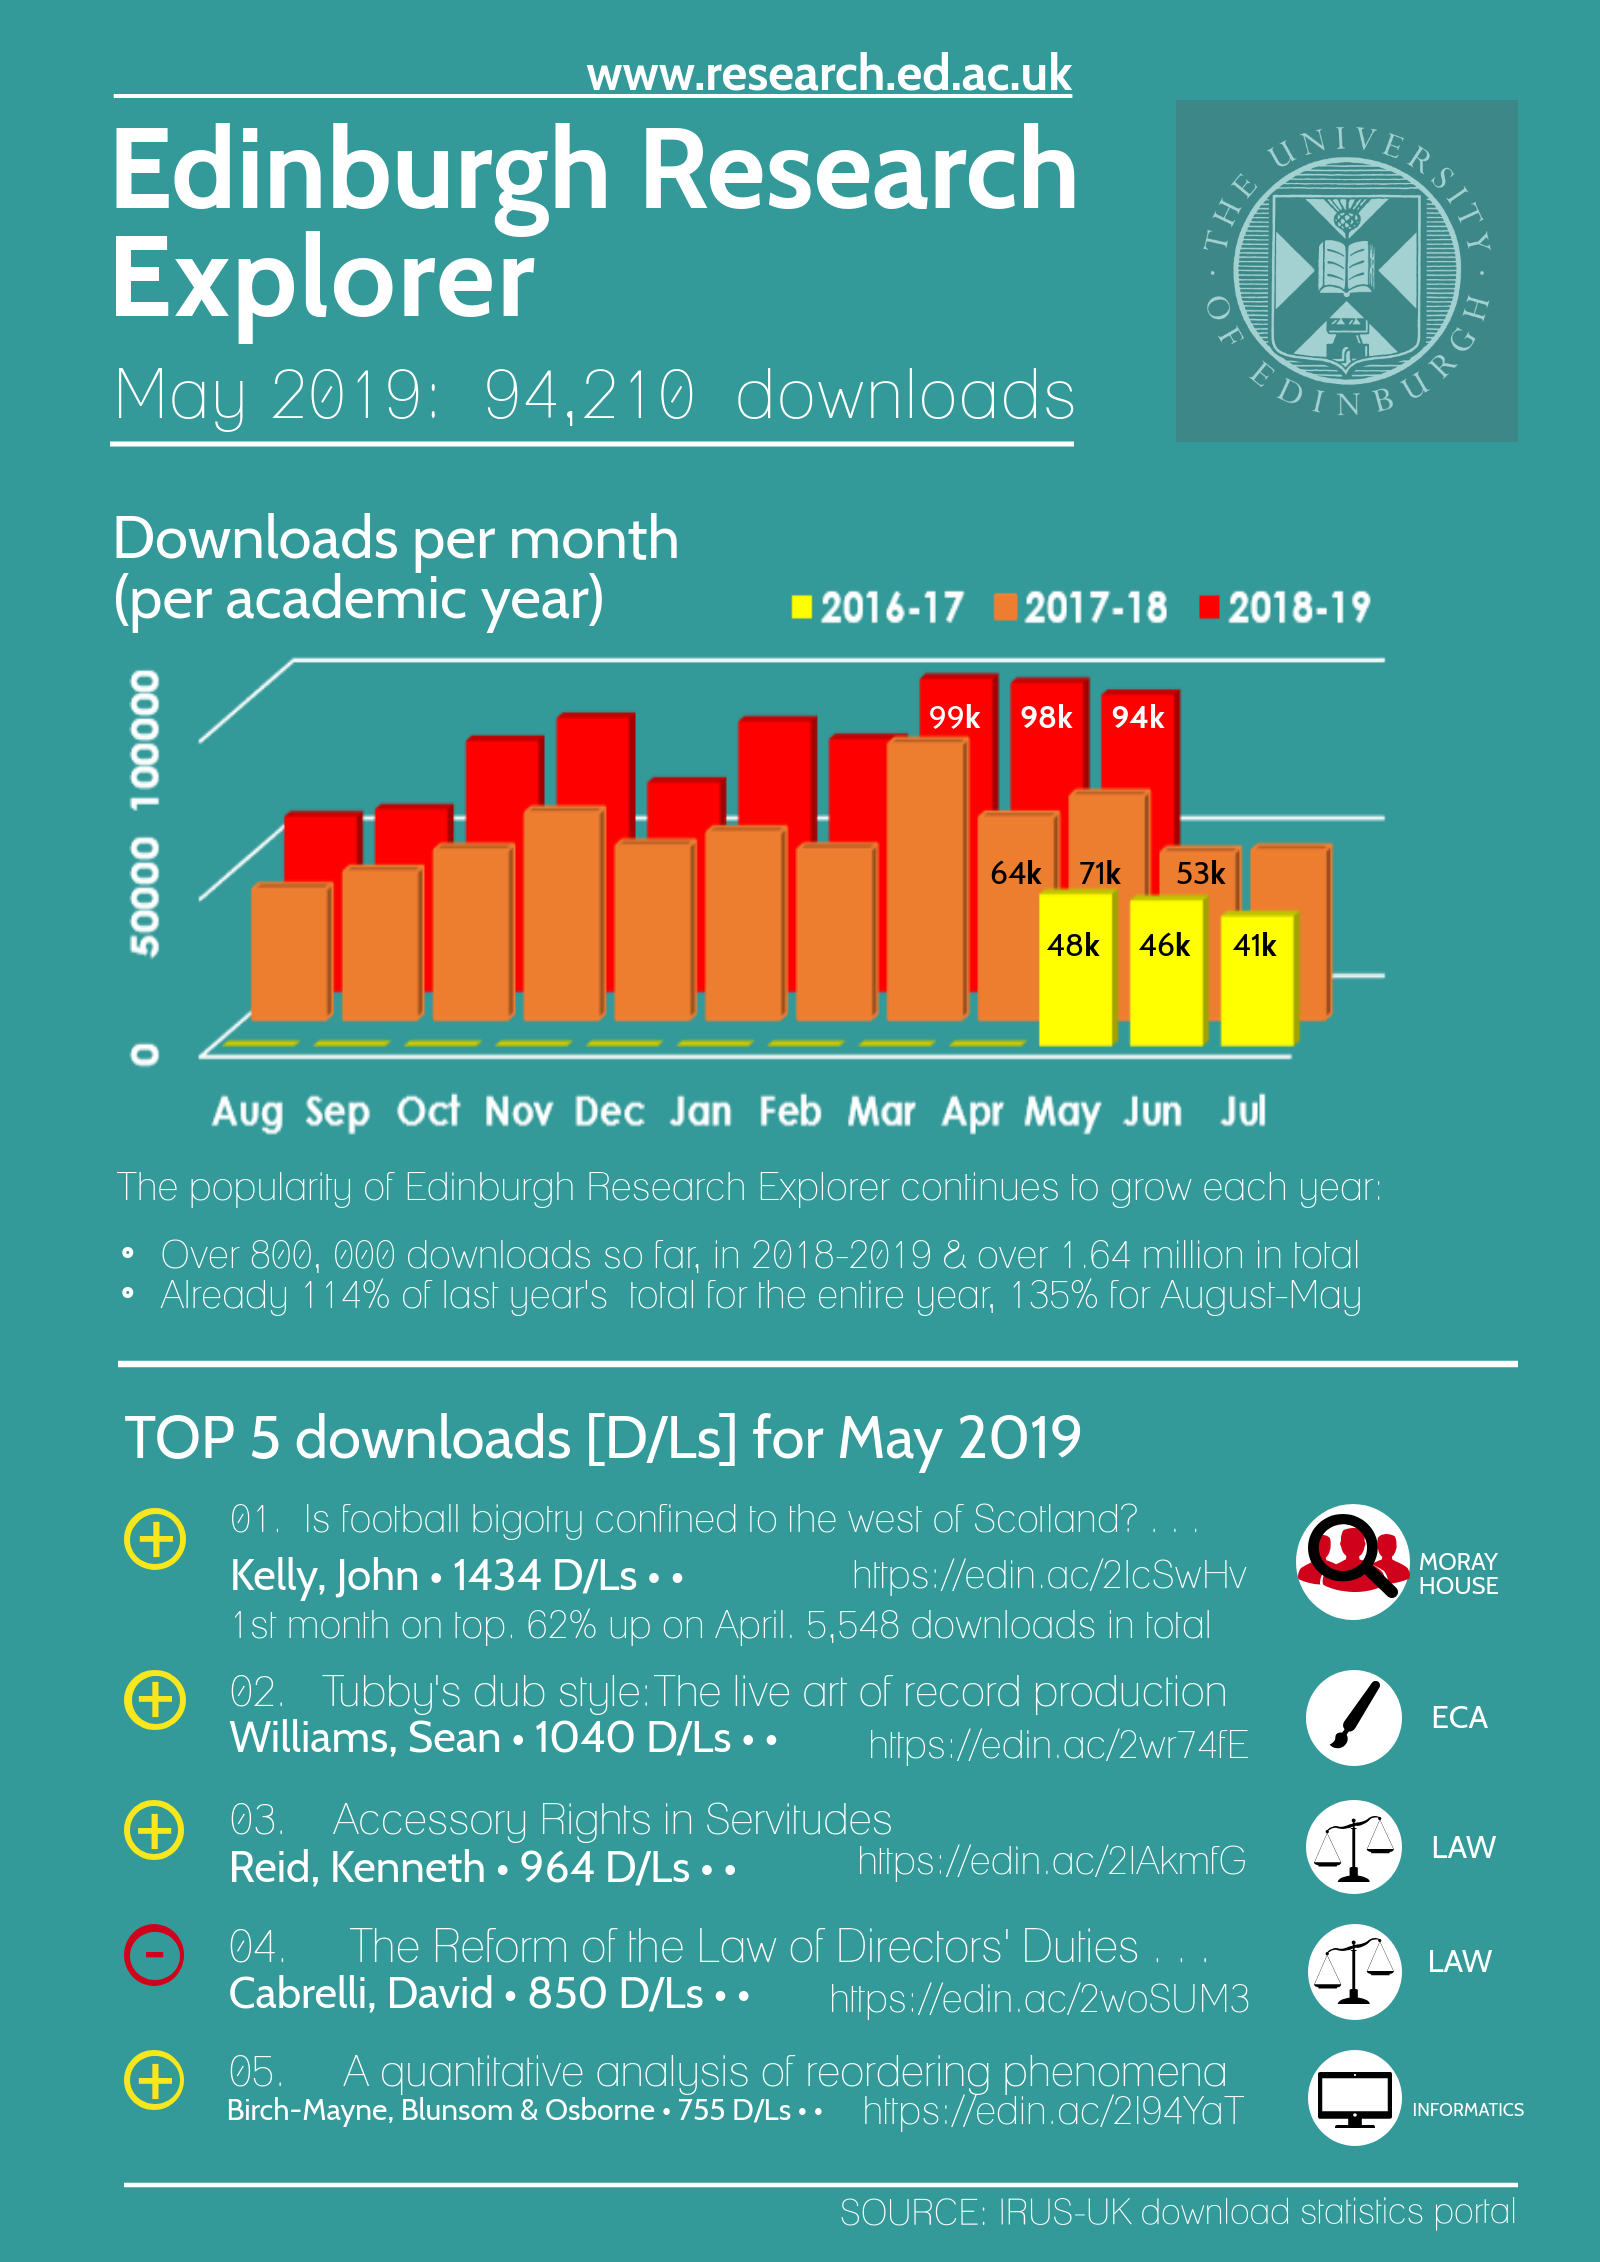 Edinburgh Research Explorer: May 2019 downloads infographic - Chart: Downloads per month (per academic year) 2016-2019